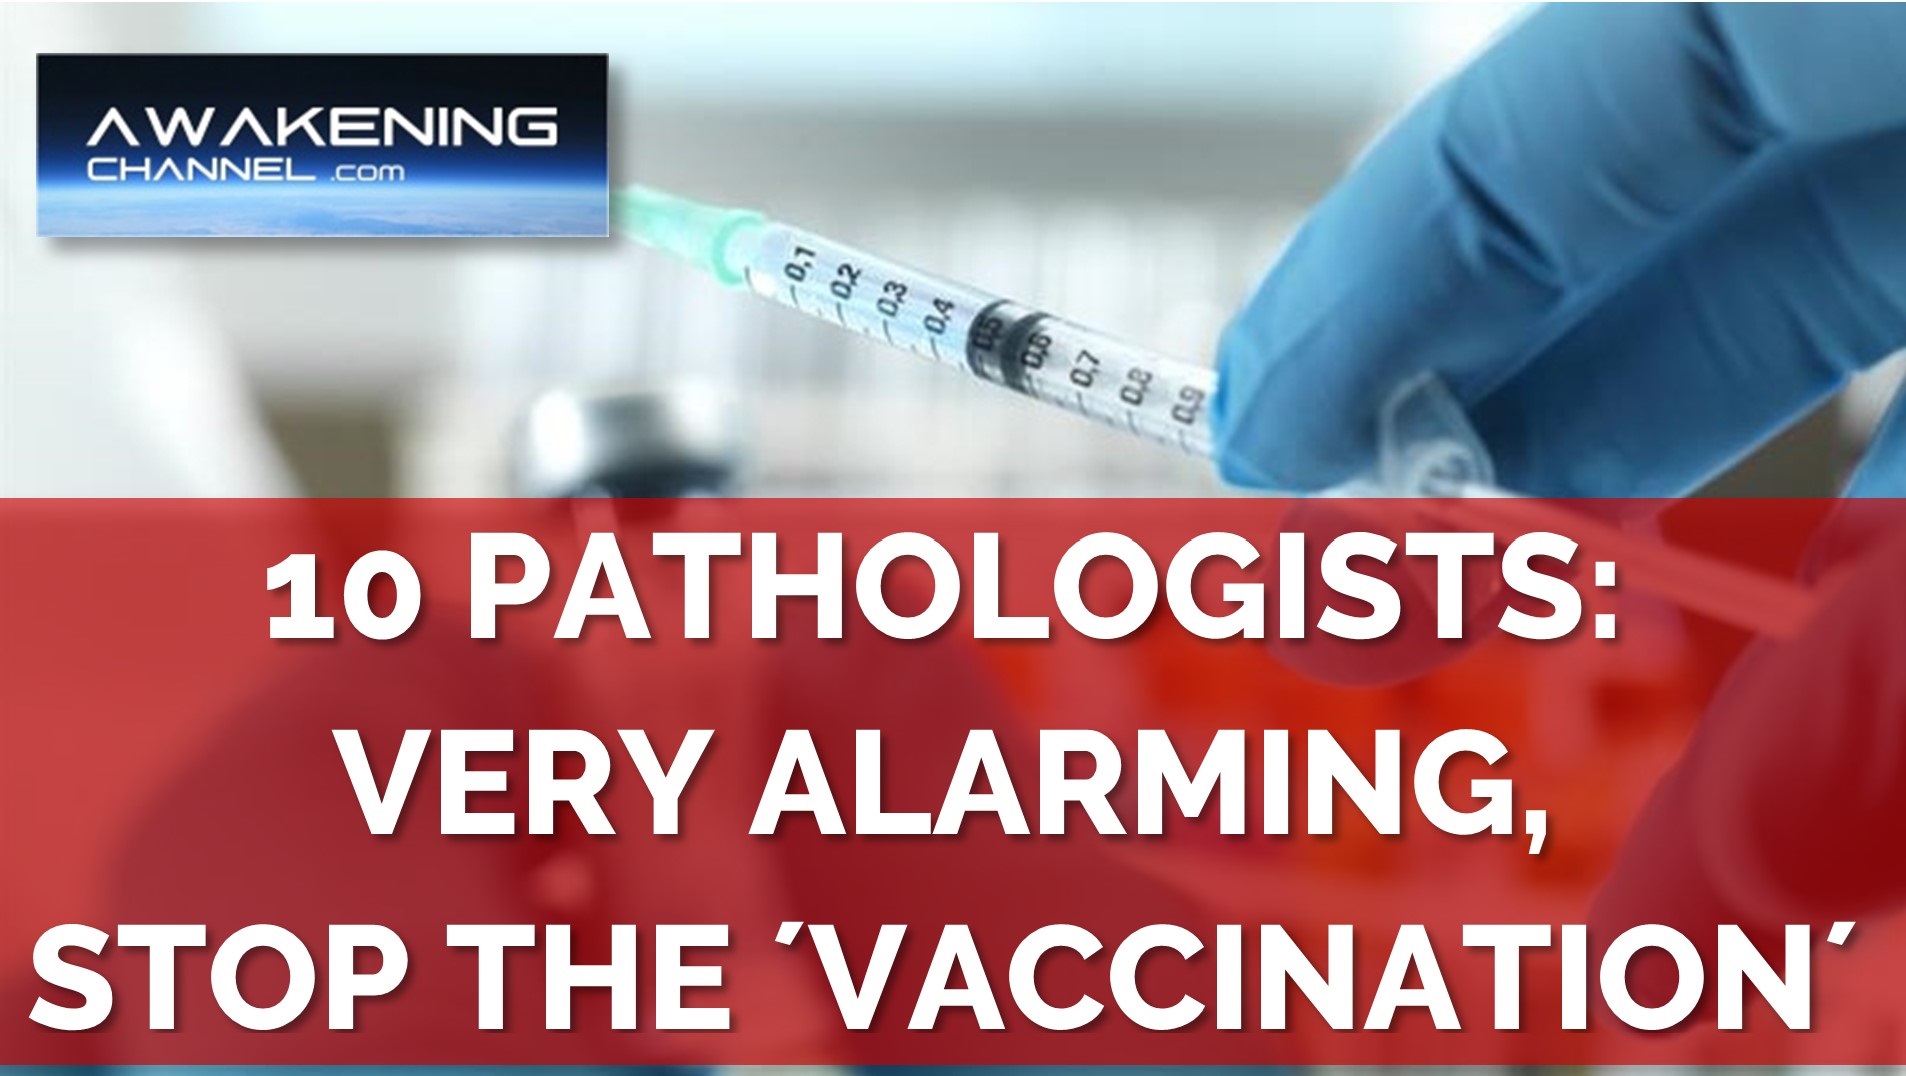 10 PATHOLOGISTS: VERY ALARMING, STOP THE ´VACCINATION´